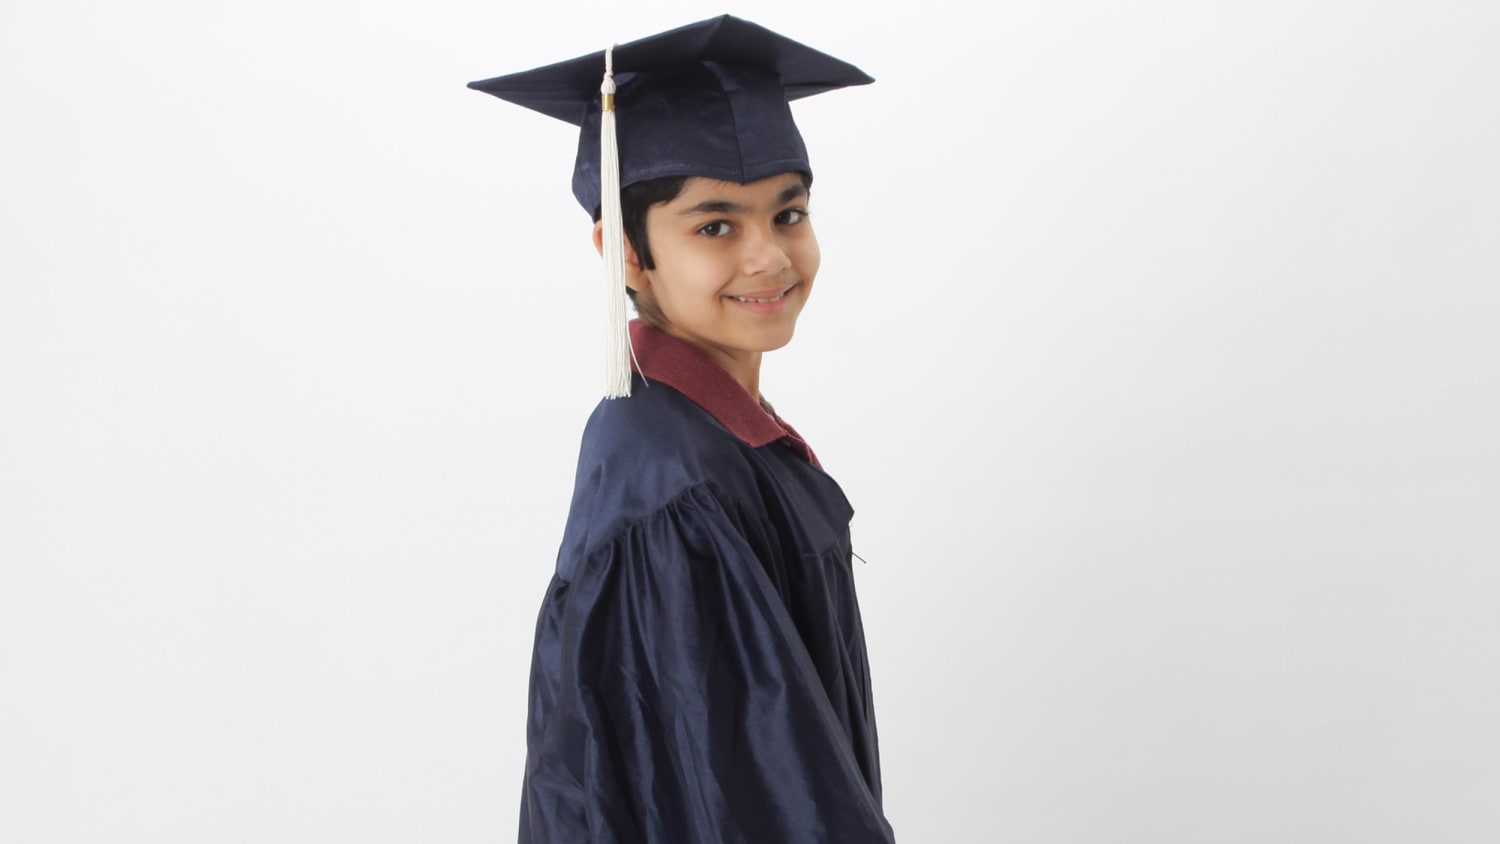 Meet the Ten-Year-Old Prodigy Who Graduated High School - Television news - NewsLocker